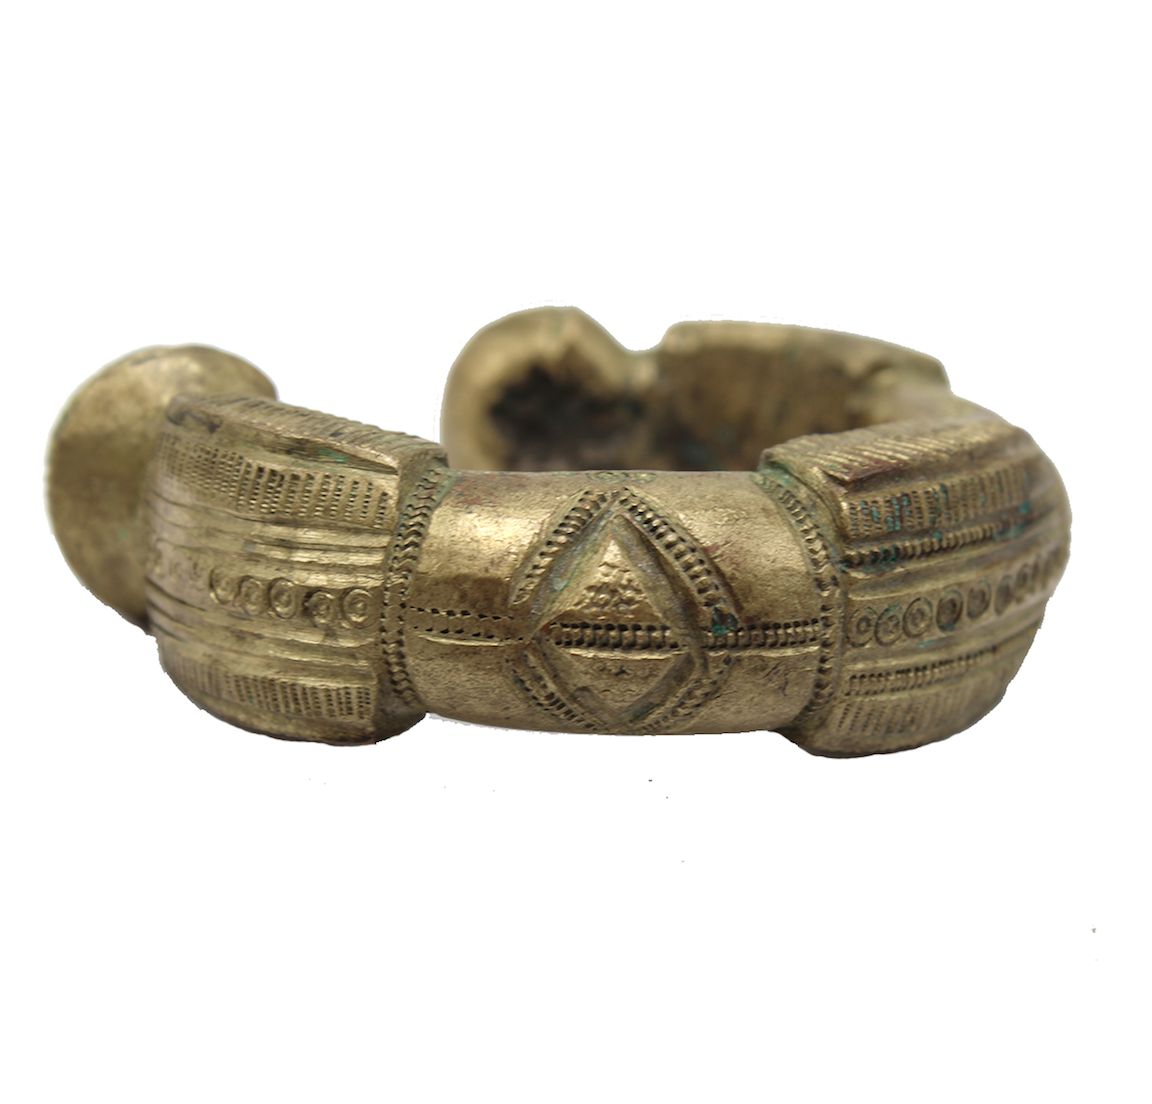 History of the West Indian Bangle - ib designs